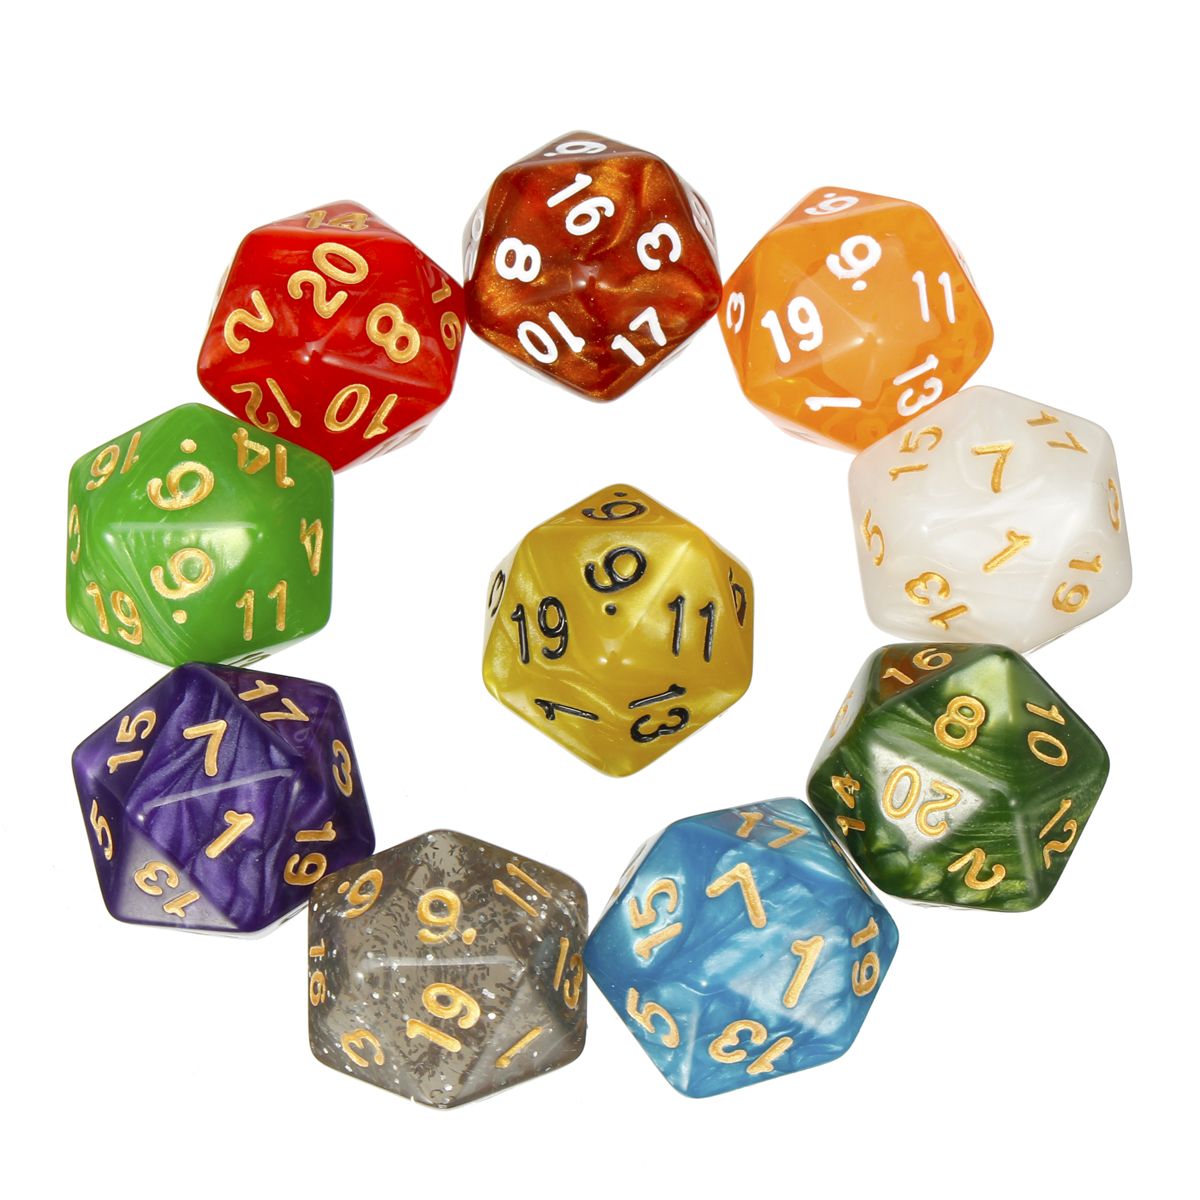 70Pcs-Acrylic-Polyhedral-Dices-Set-Role-Playing-Game-Dice-Gadget-for-Dungeons-Dragons-D20-D12-D10-D8-1600701